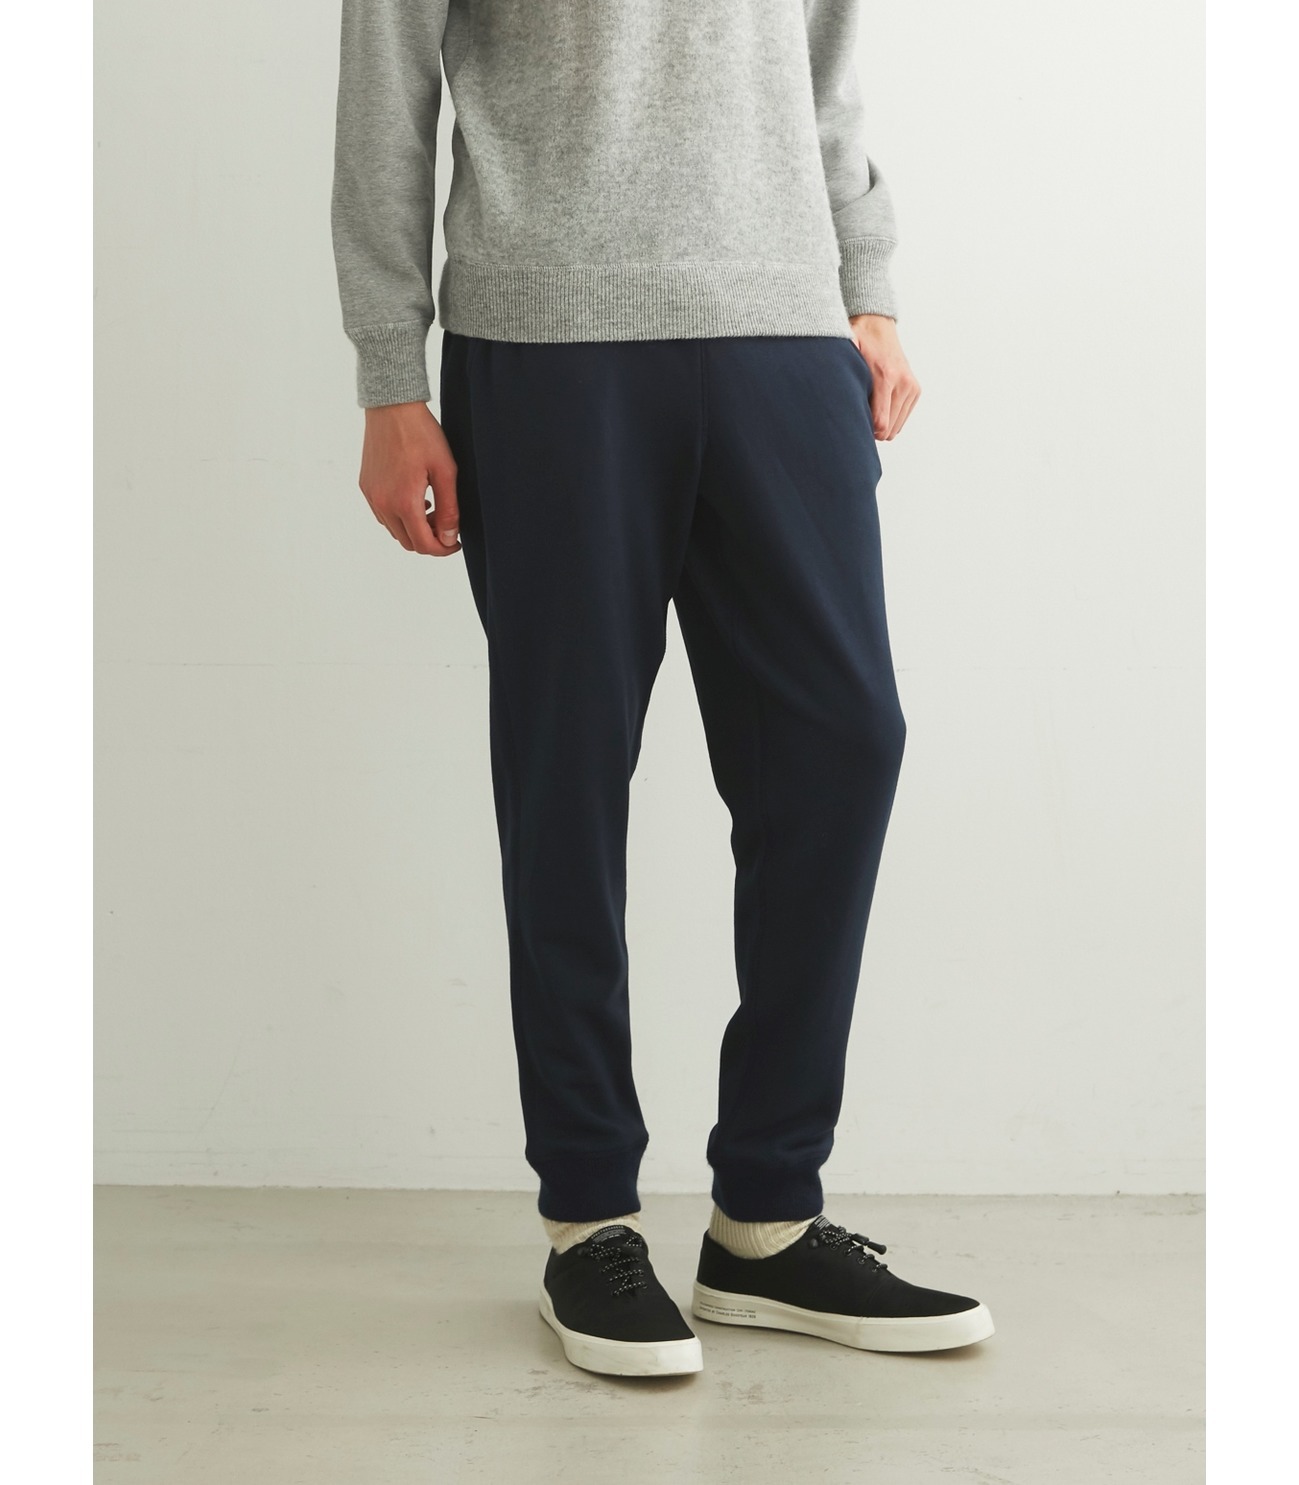 Cashmere×new soft terry pants 詳細画像 navy 6